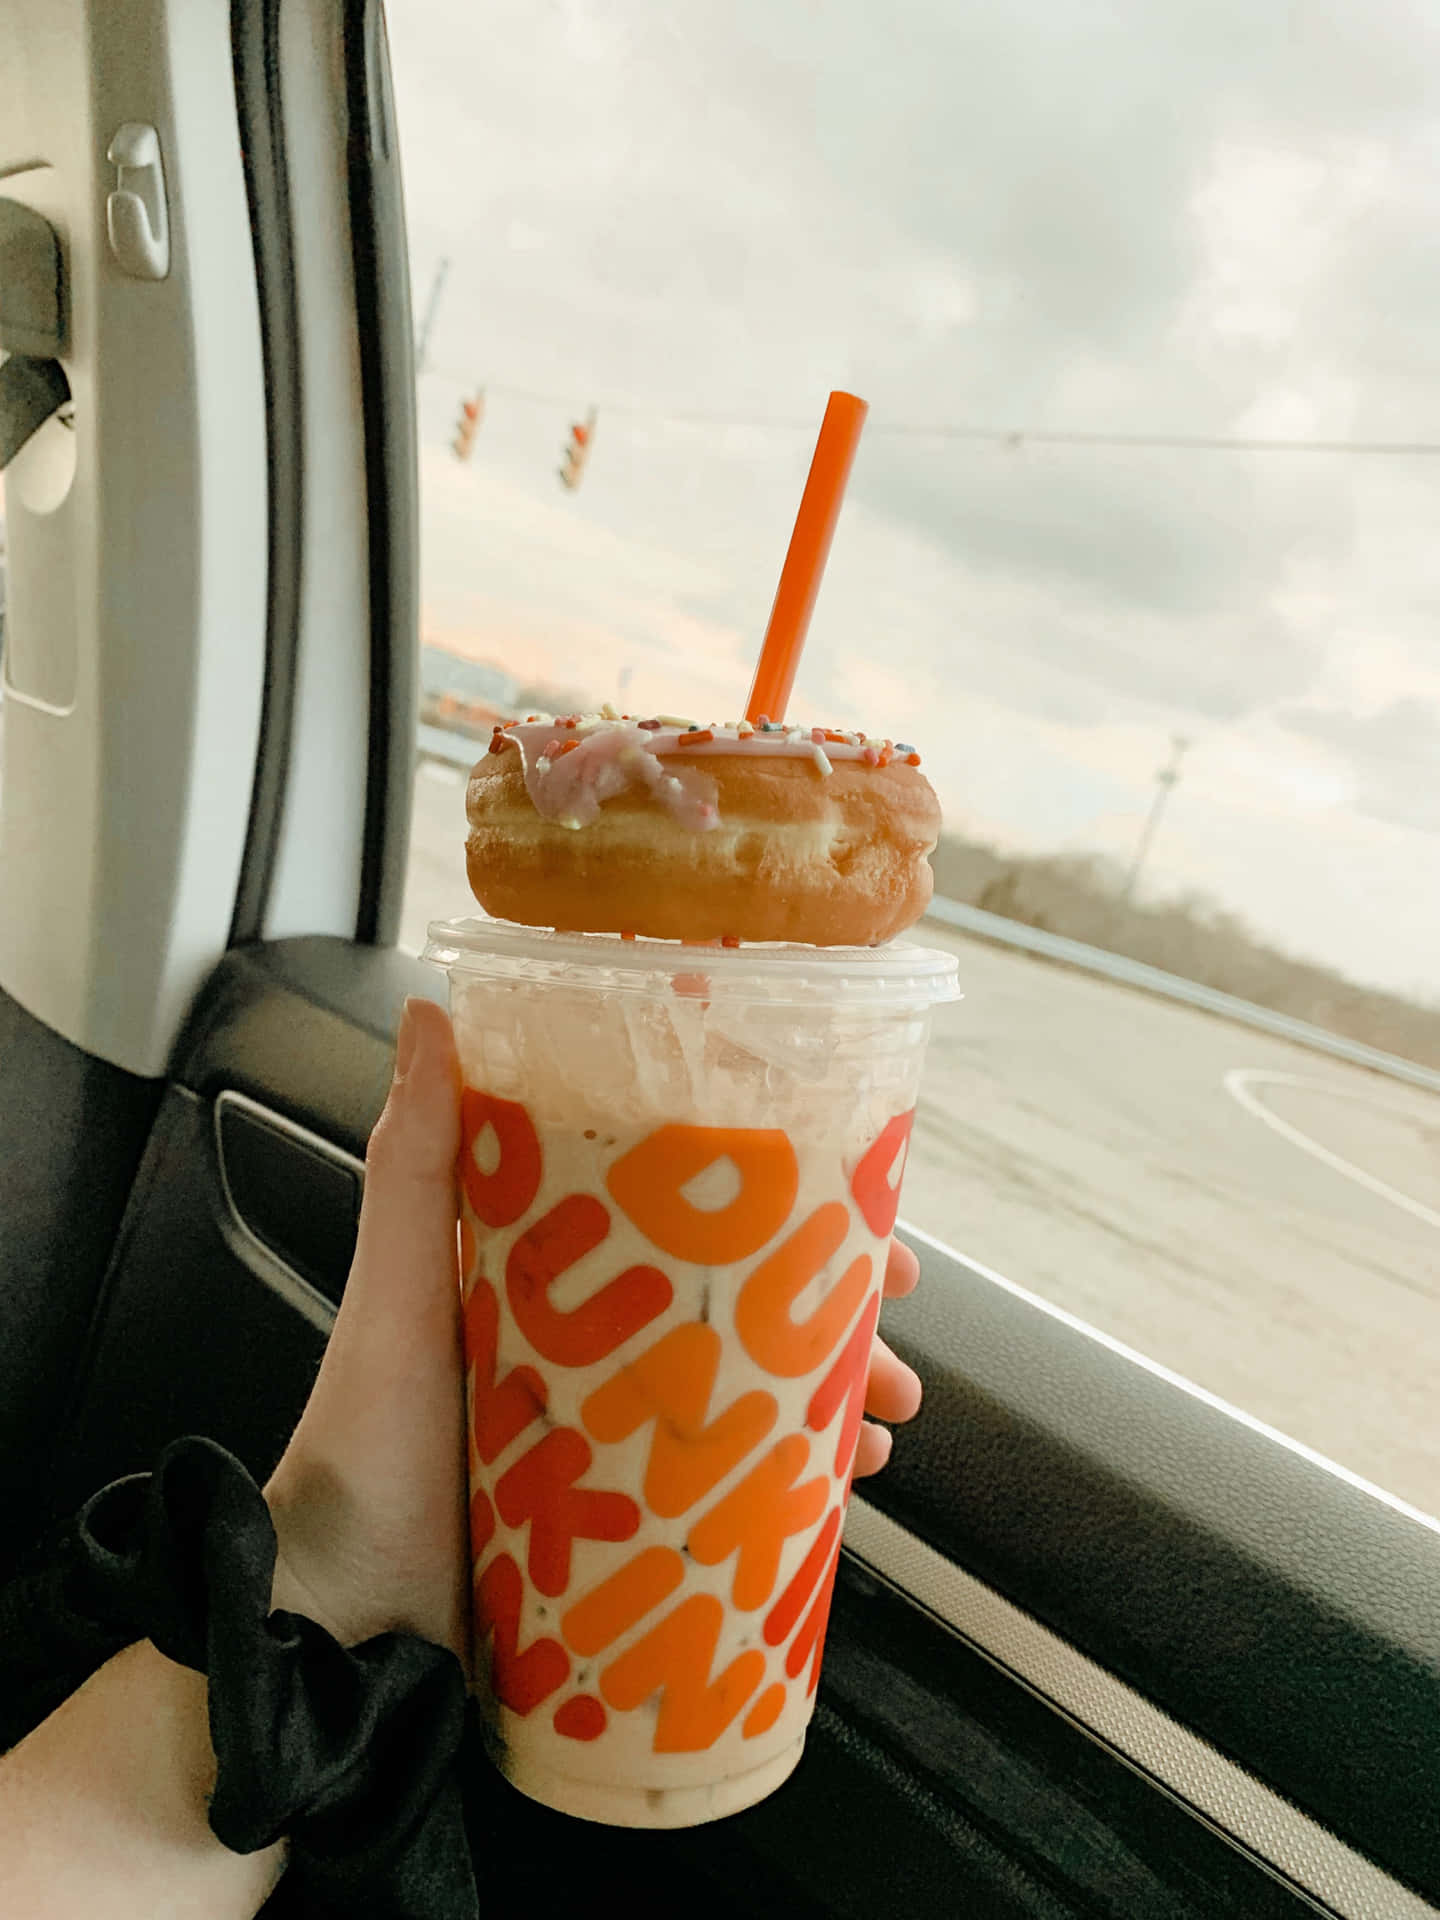 Dunkin' Donuts is Bringing a Sweet Combination of Quality and Variety